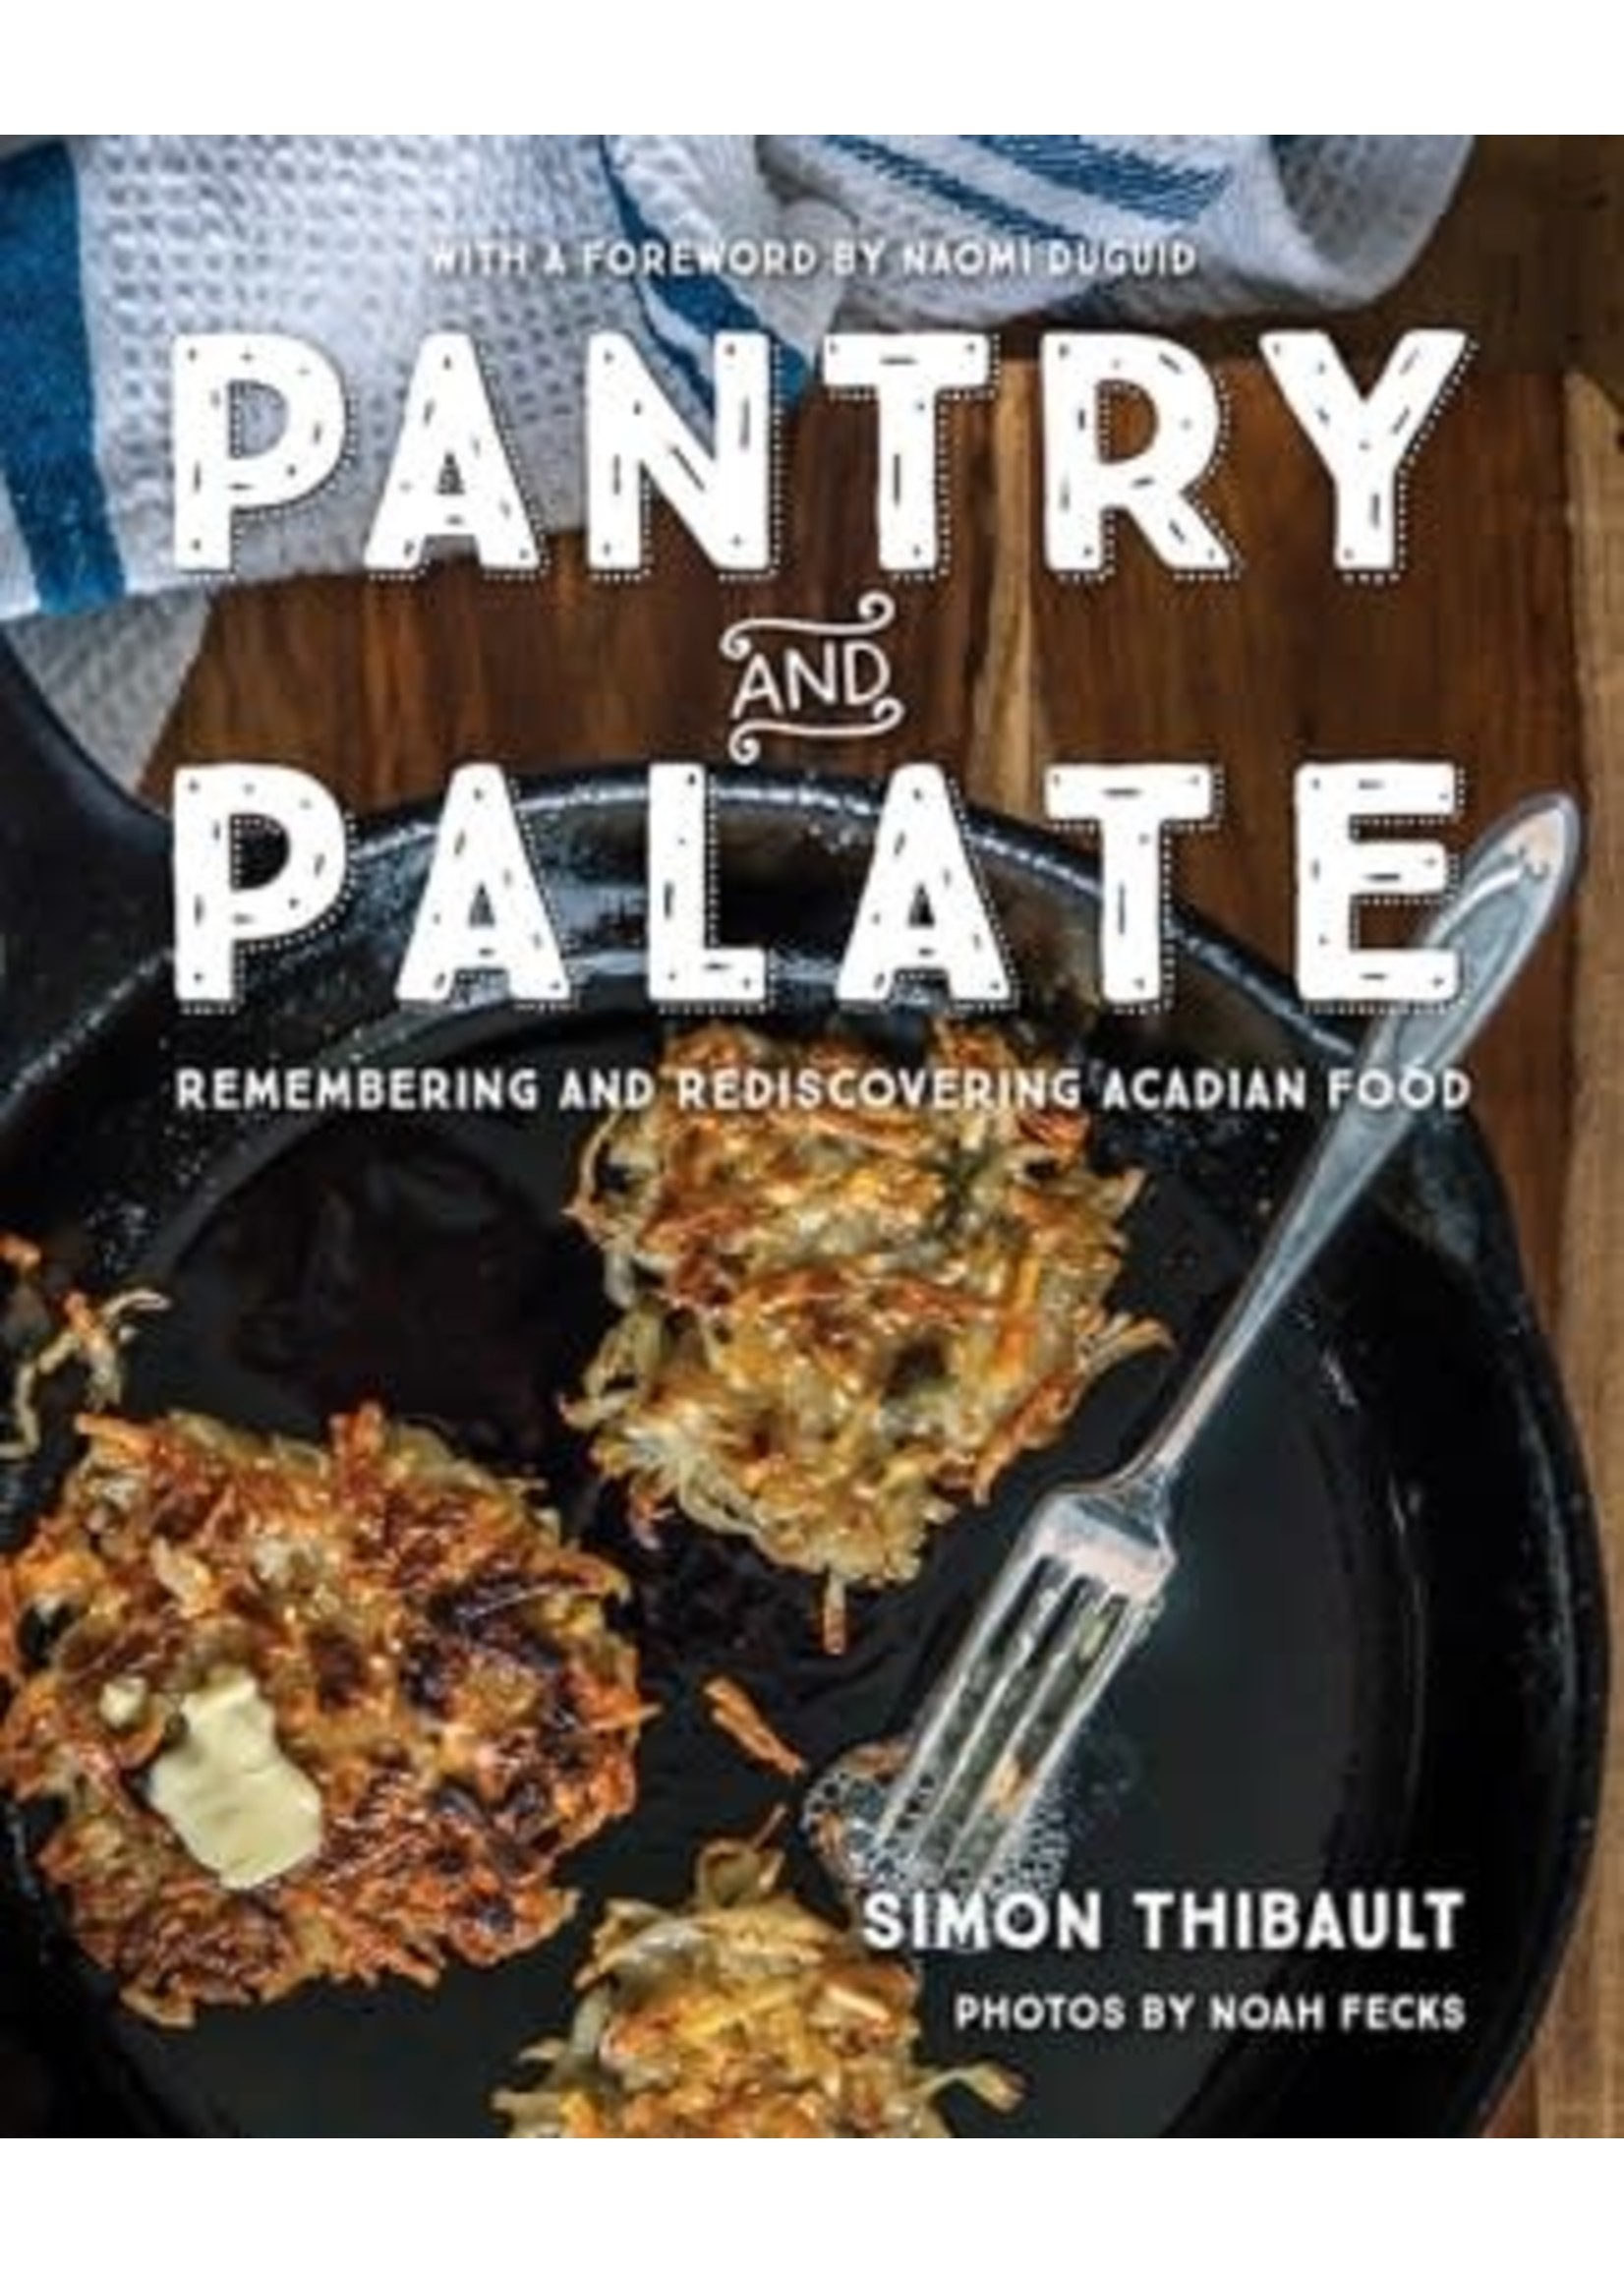 Pantry and Palate: Remembering and Rediscovering Acadian Food by Simon Thibault